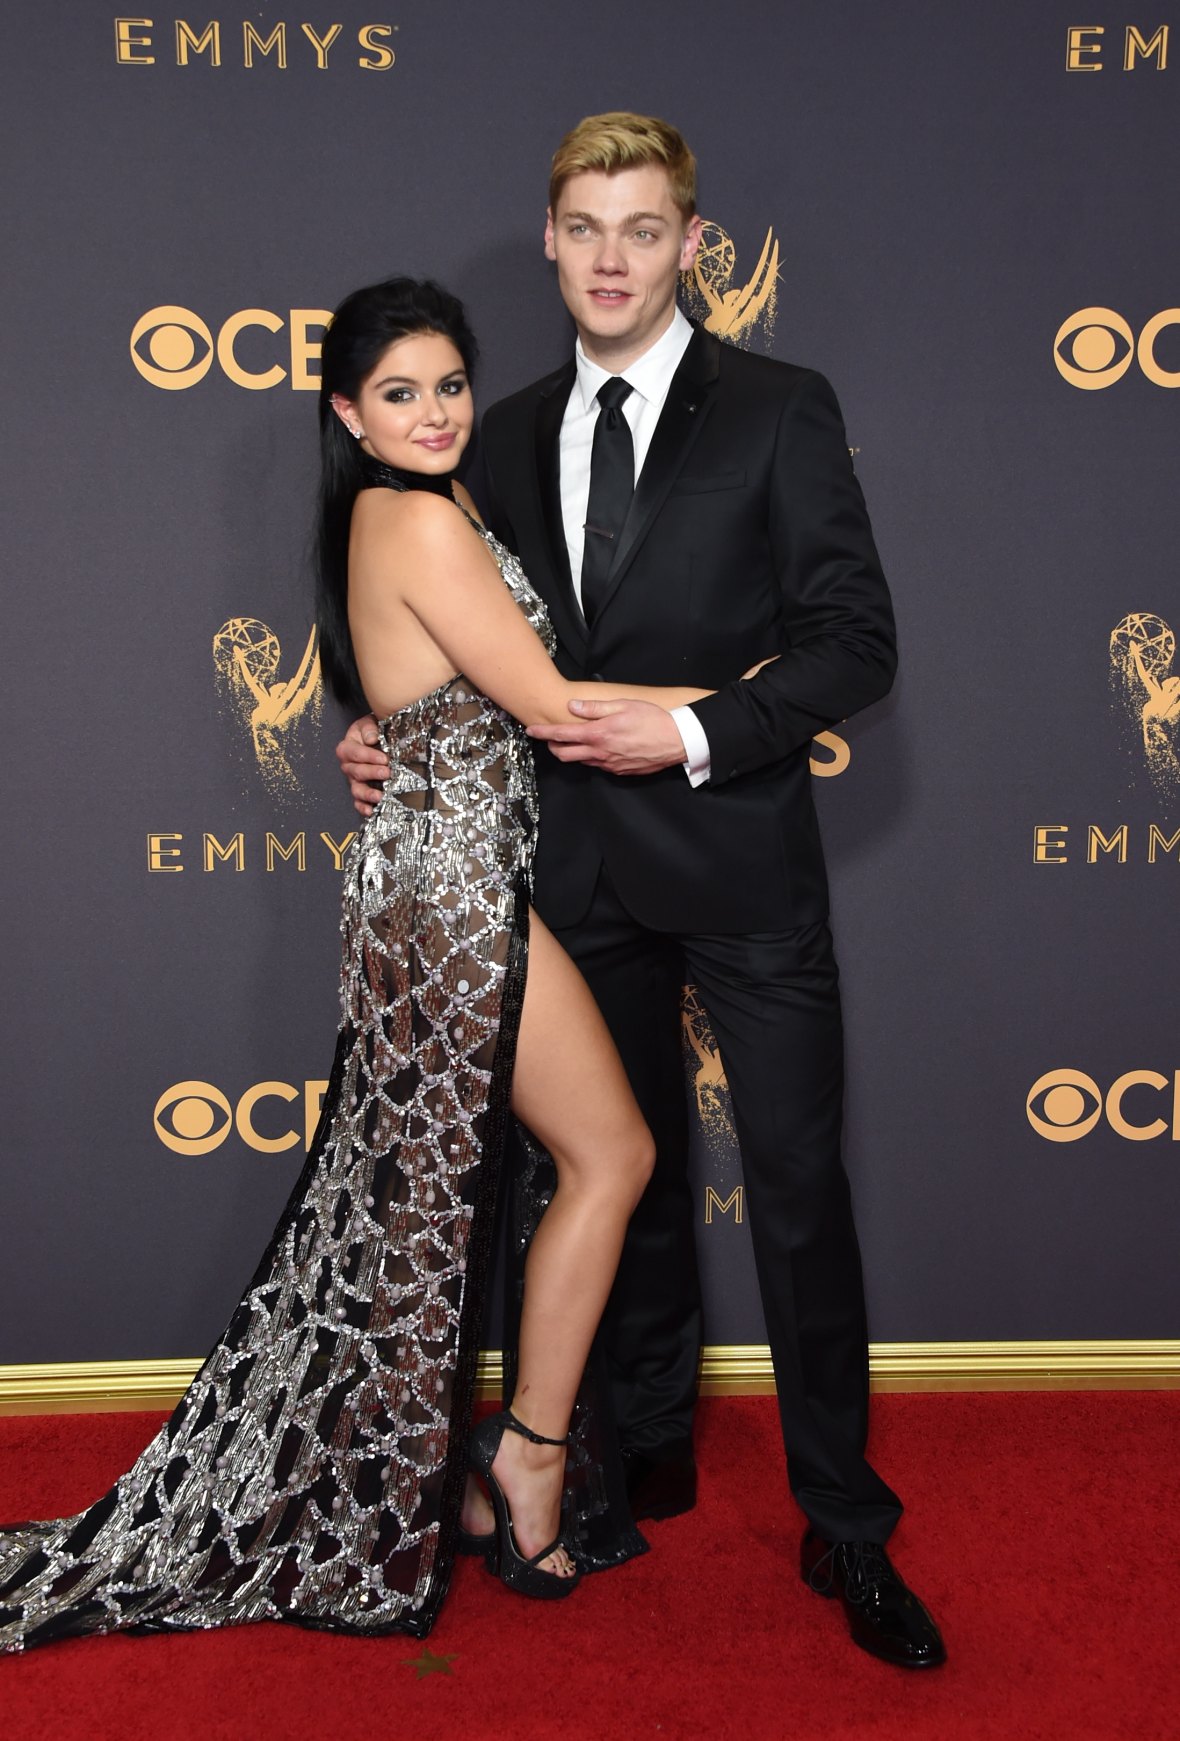 Ariel Winter Body Sexy Porn - Ariel Winter's 2017 Emmys Red Carpet Look Is Turning Heads â€” See Here